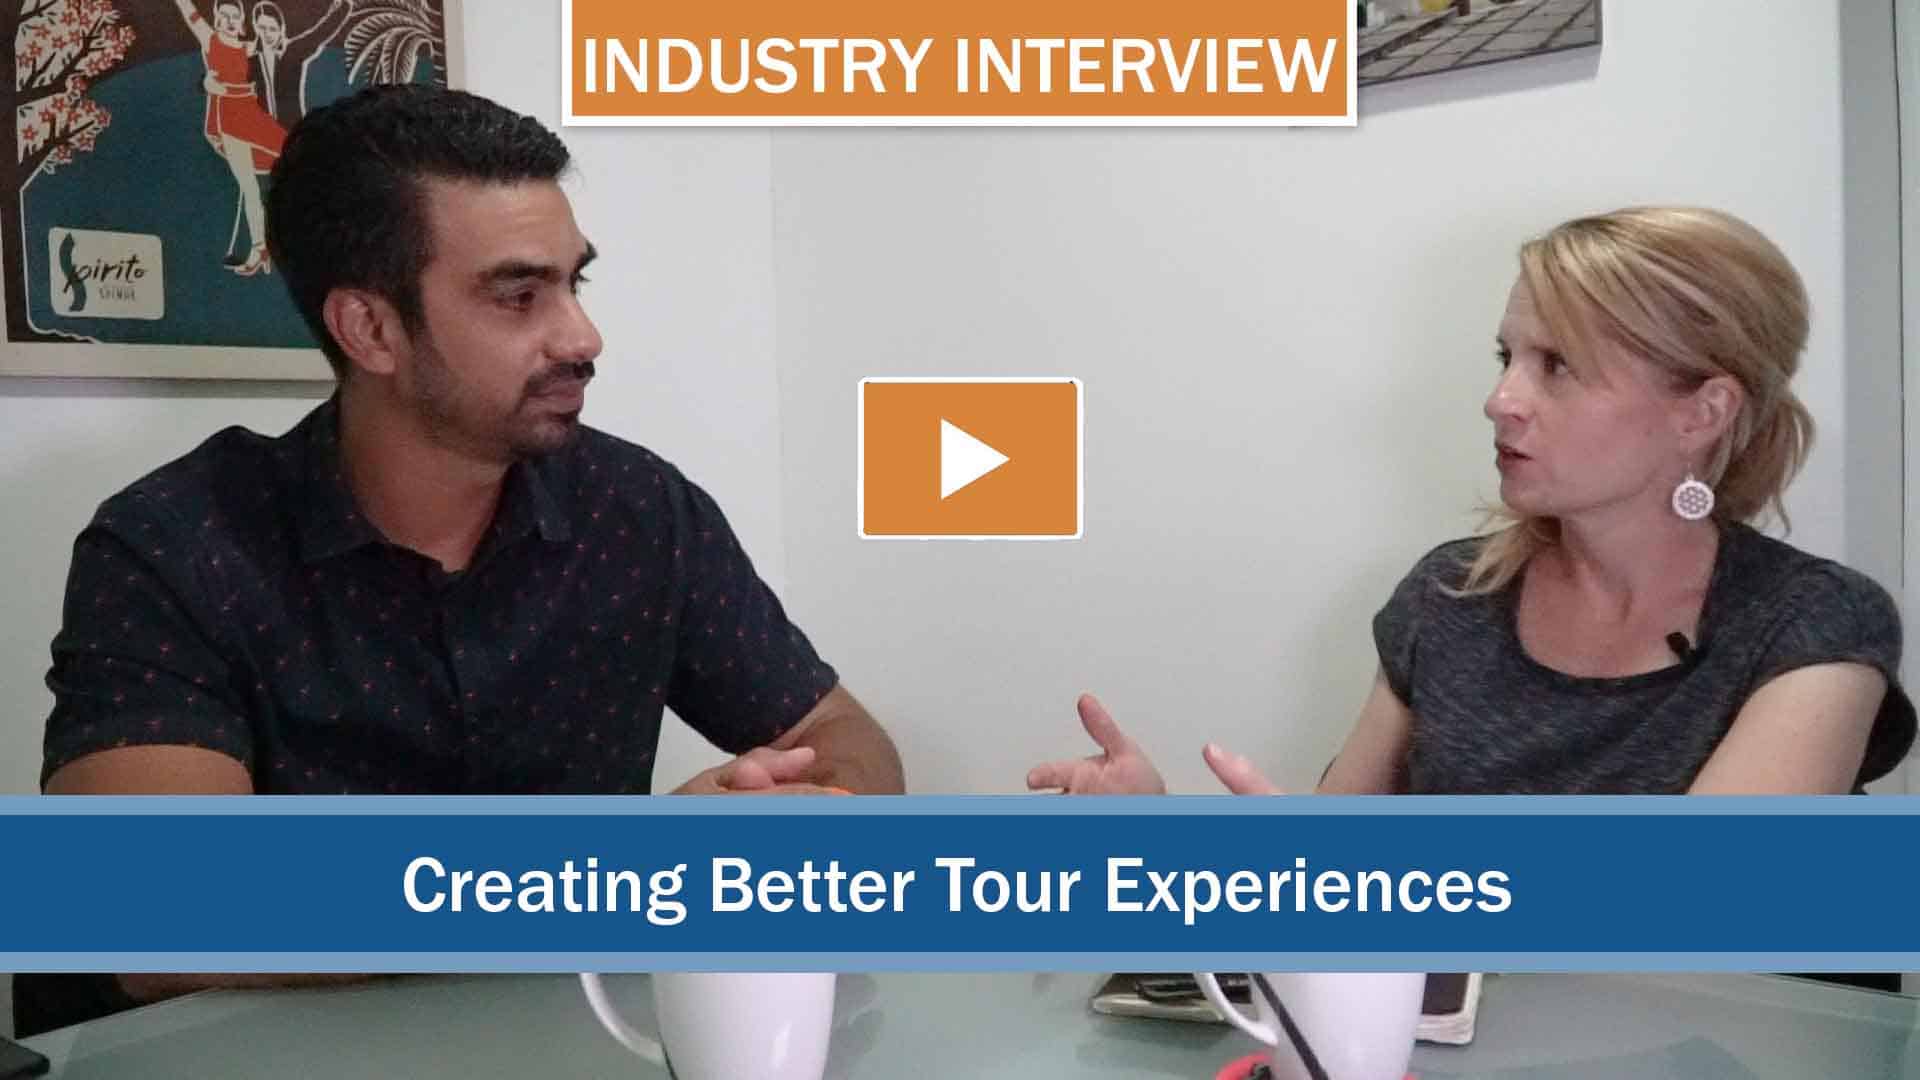 industry interview- how to create better tour experiences